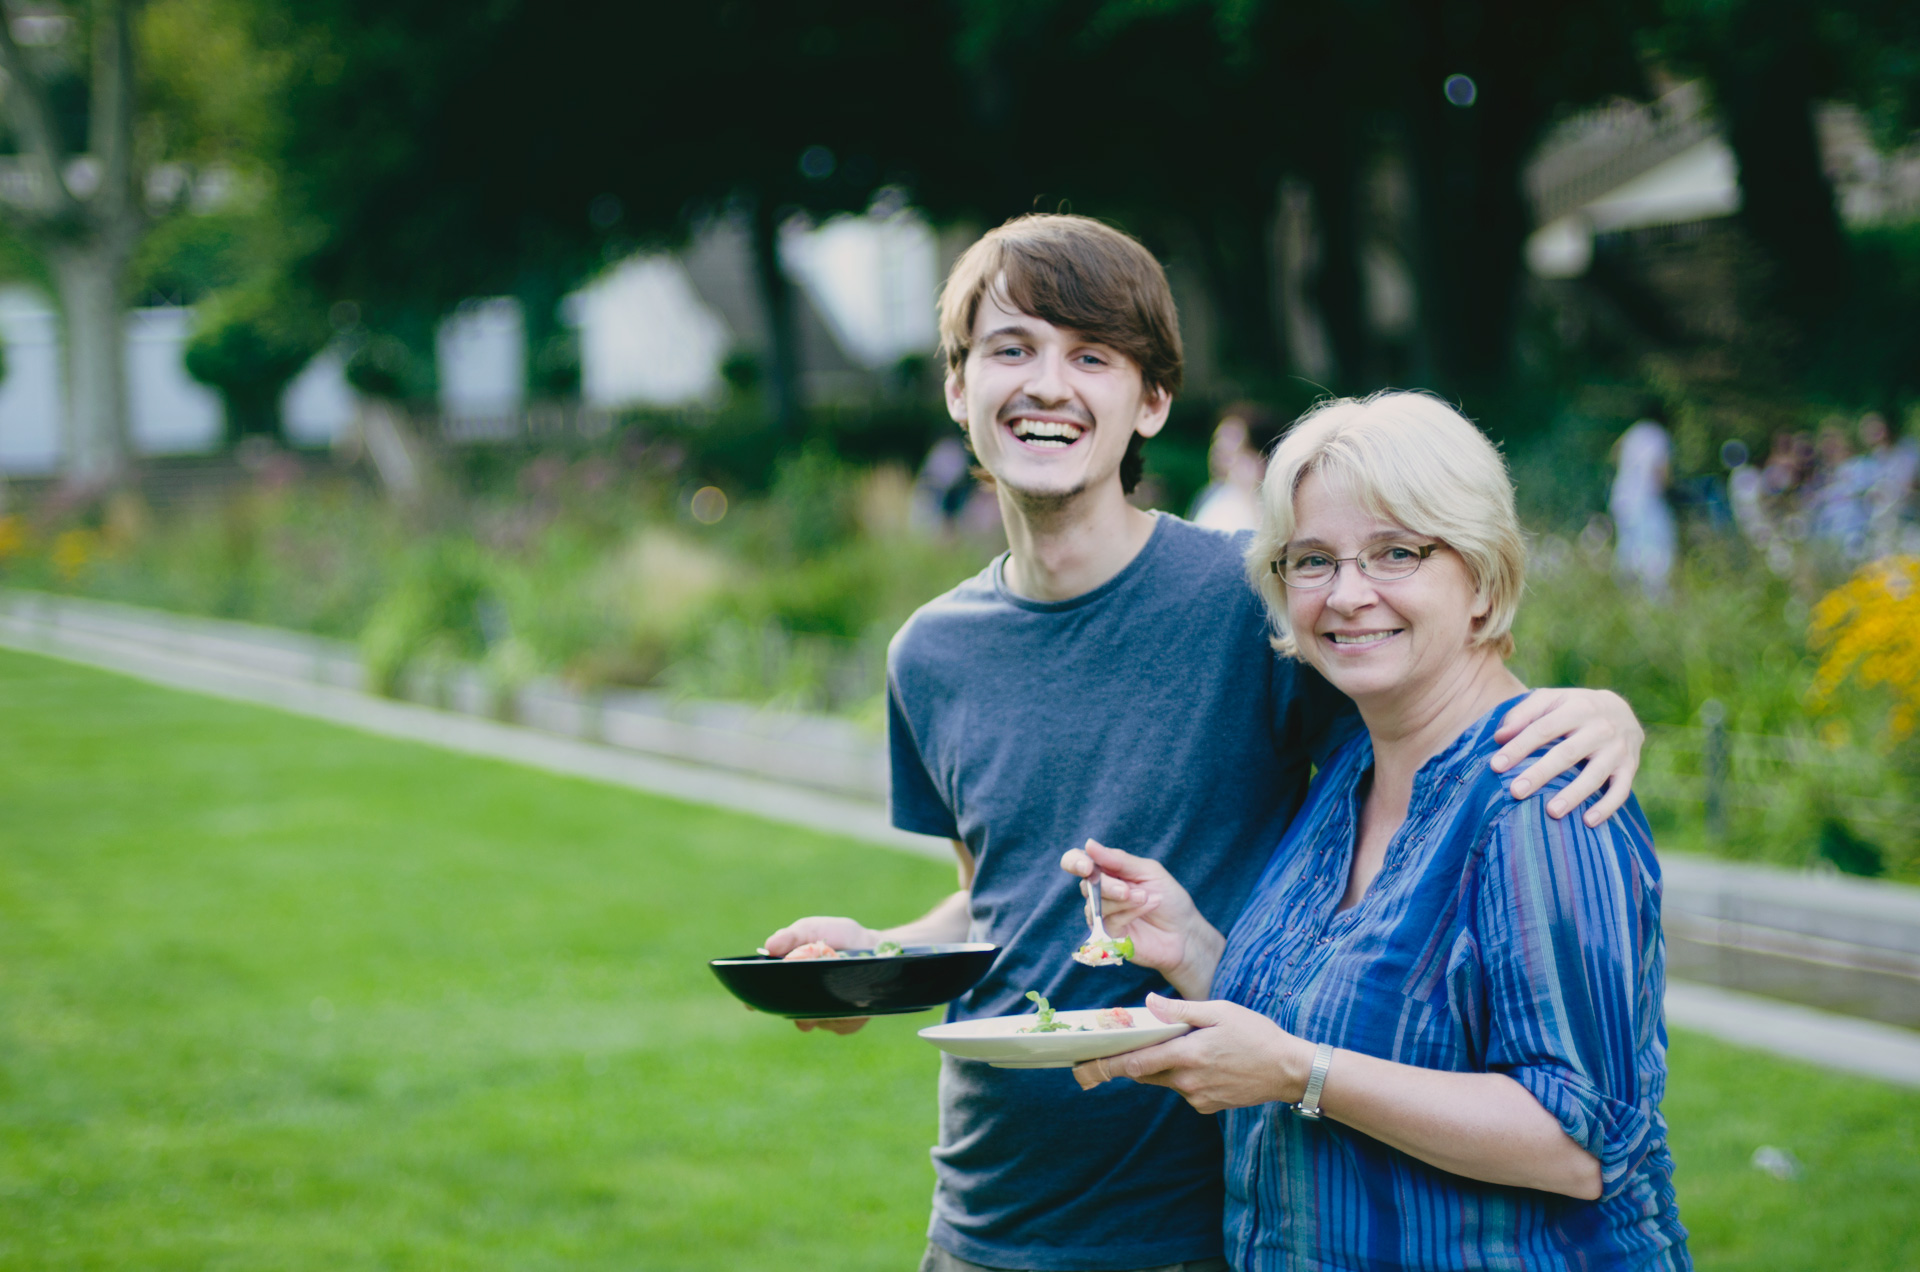 Foodadit family – Alastair and his Mum, Anne Coates